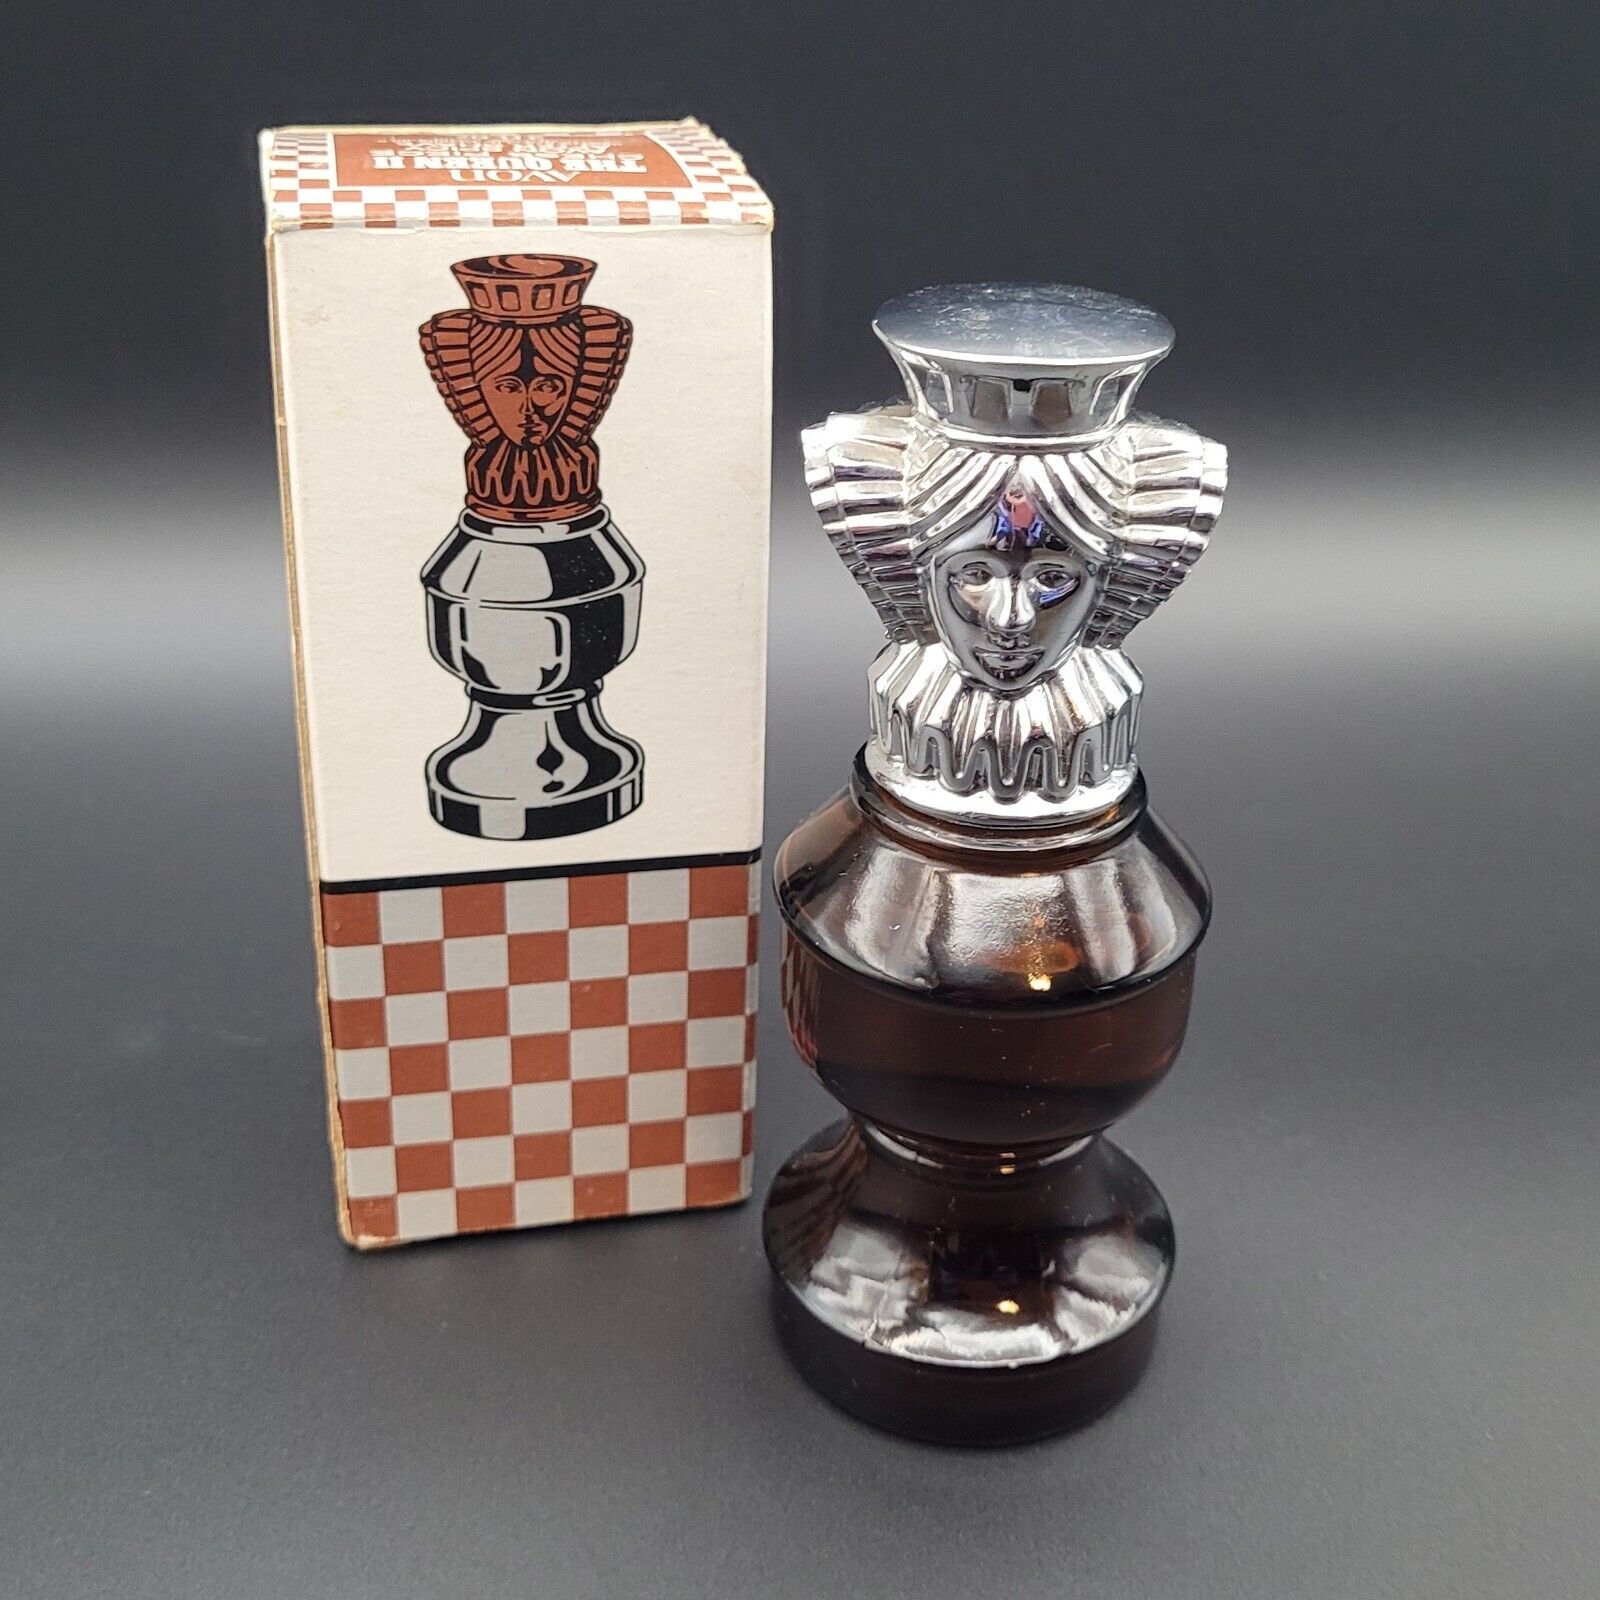 New in Box Vintage Avon The Queen Chess Piece Tai Winds After Shave 3. oz Full